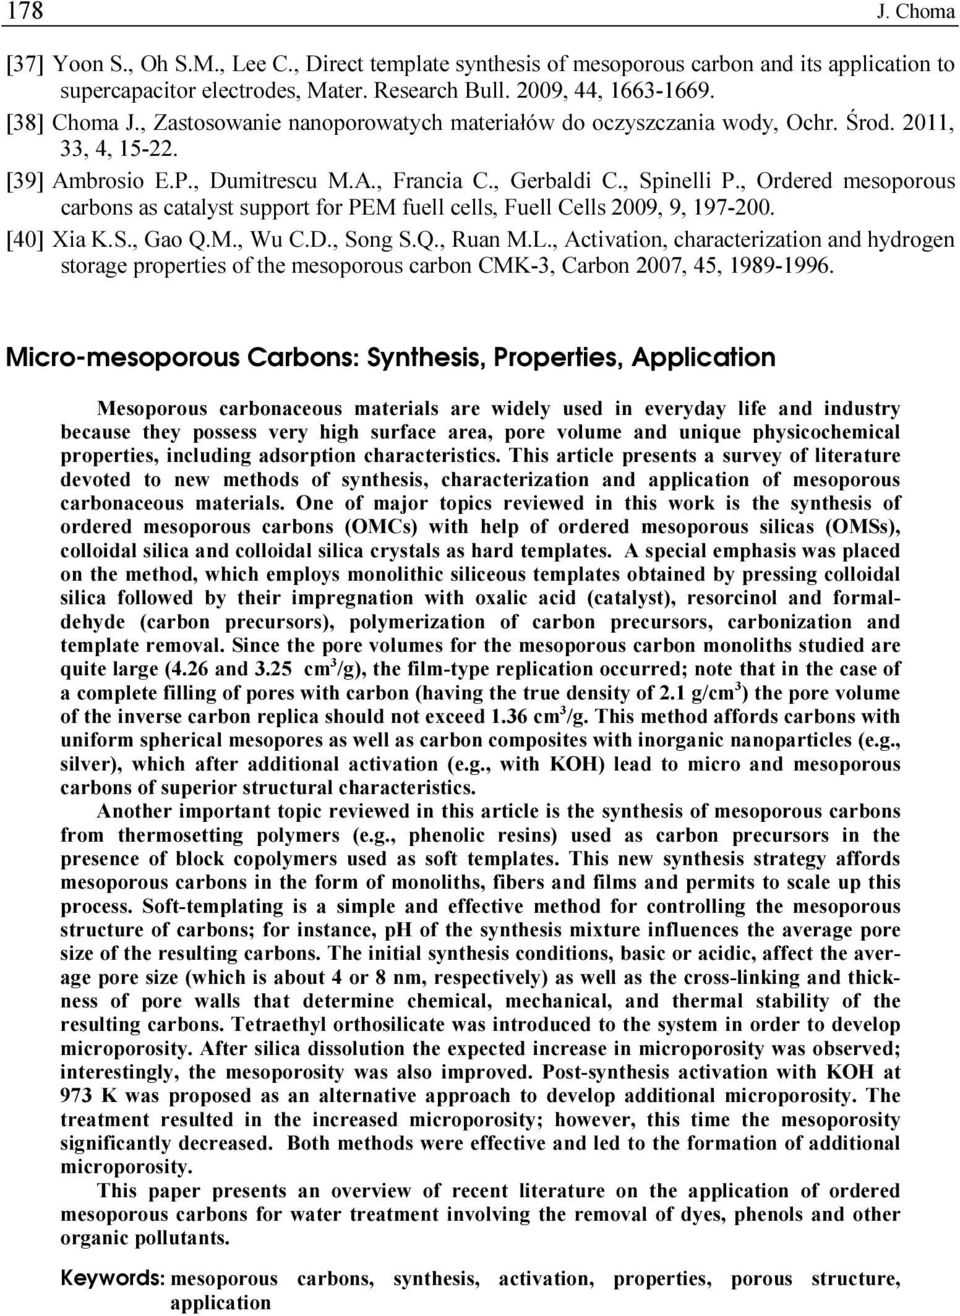 , Ordered mesoporous carbons as catalyst support for PEM fuell cells, Fuell Cells 2009, 9, 197-200. [40] Xia K.S., Gao Q.M., Wu C.D., Song S.Q., Ruan M.L.